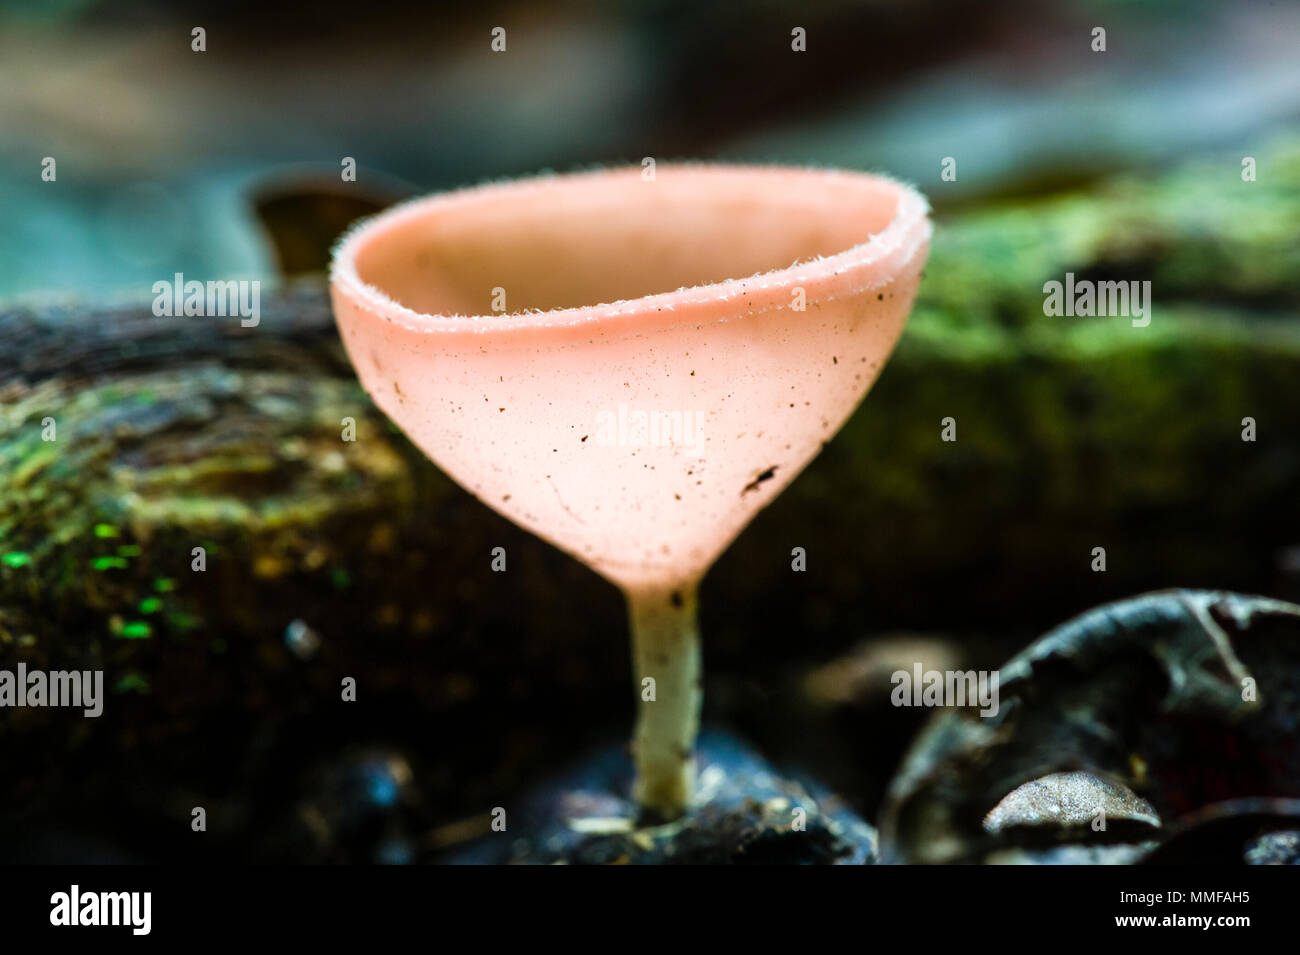 A translucent fungi cup growing on the rainforest floor. Stock Photo